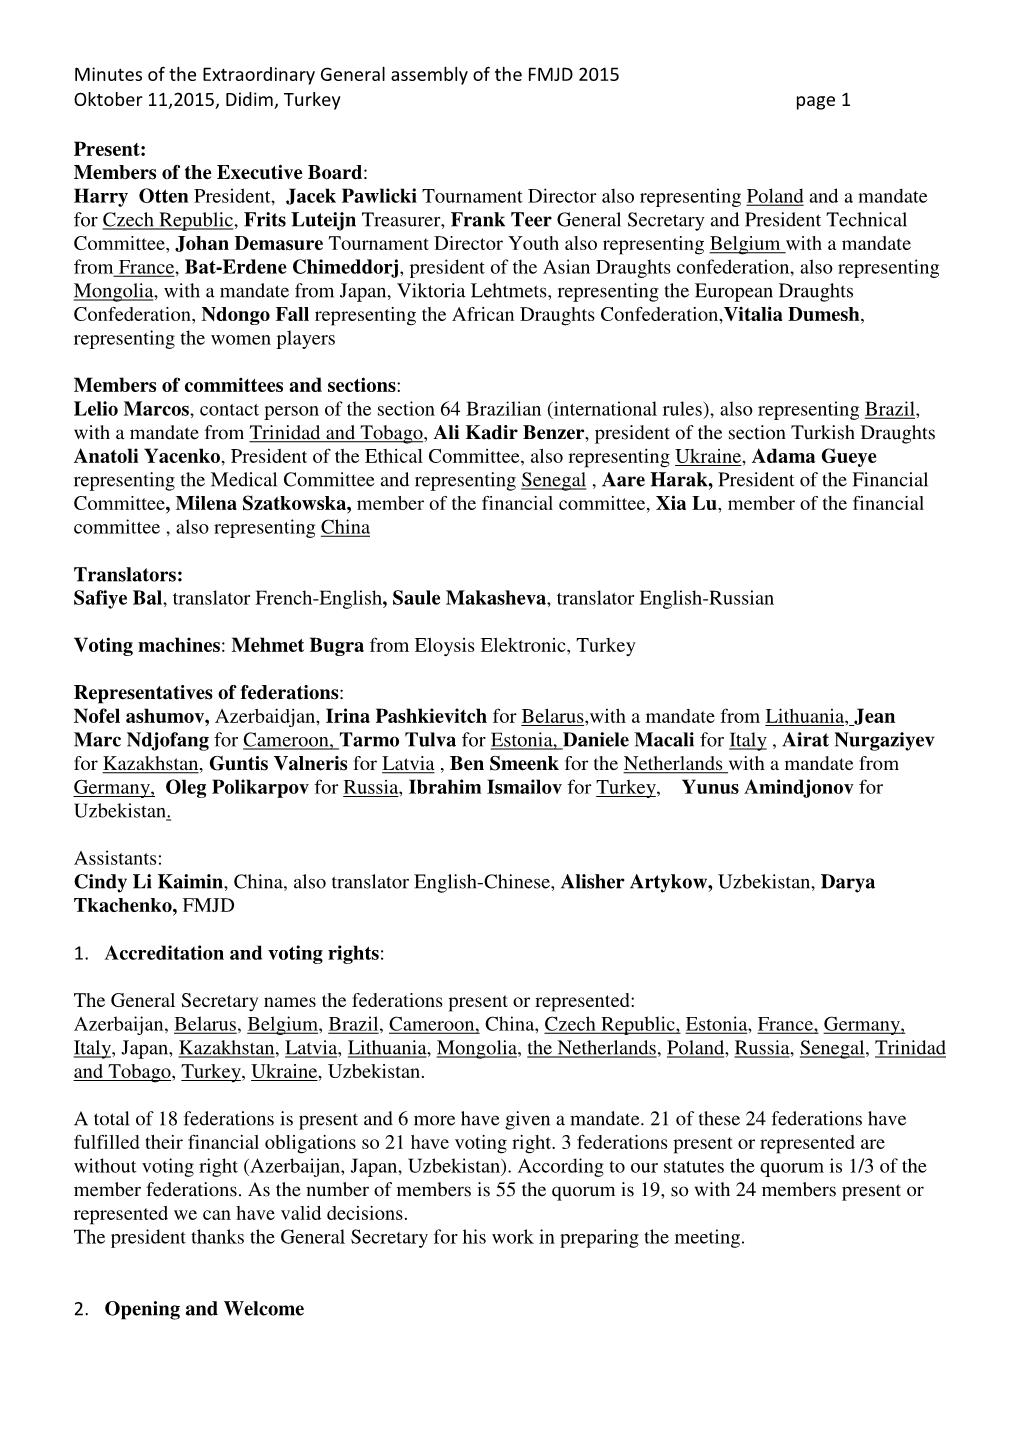 Minutes of the Extraordinary General Assembly of the FMJD 2015 Oktober 11,2015, Didim, Turkey Page 1